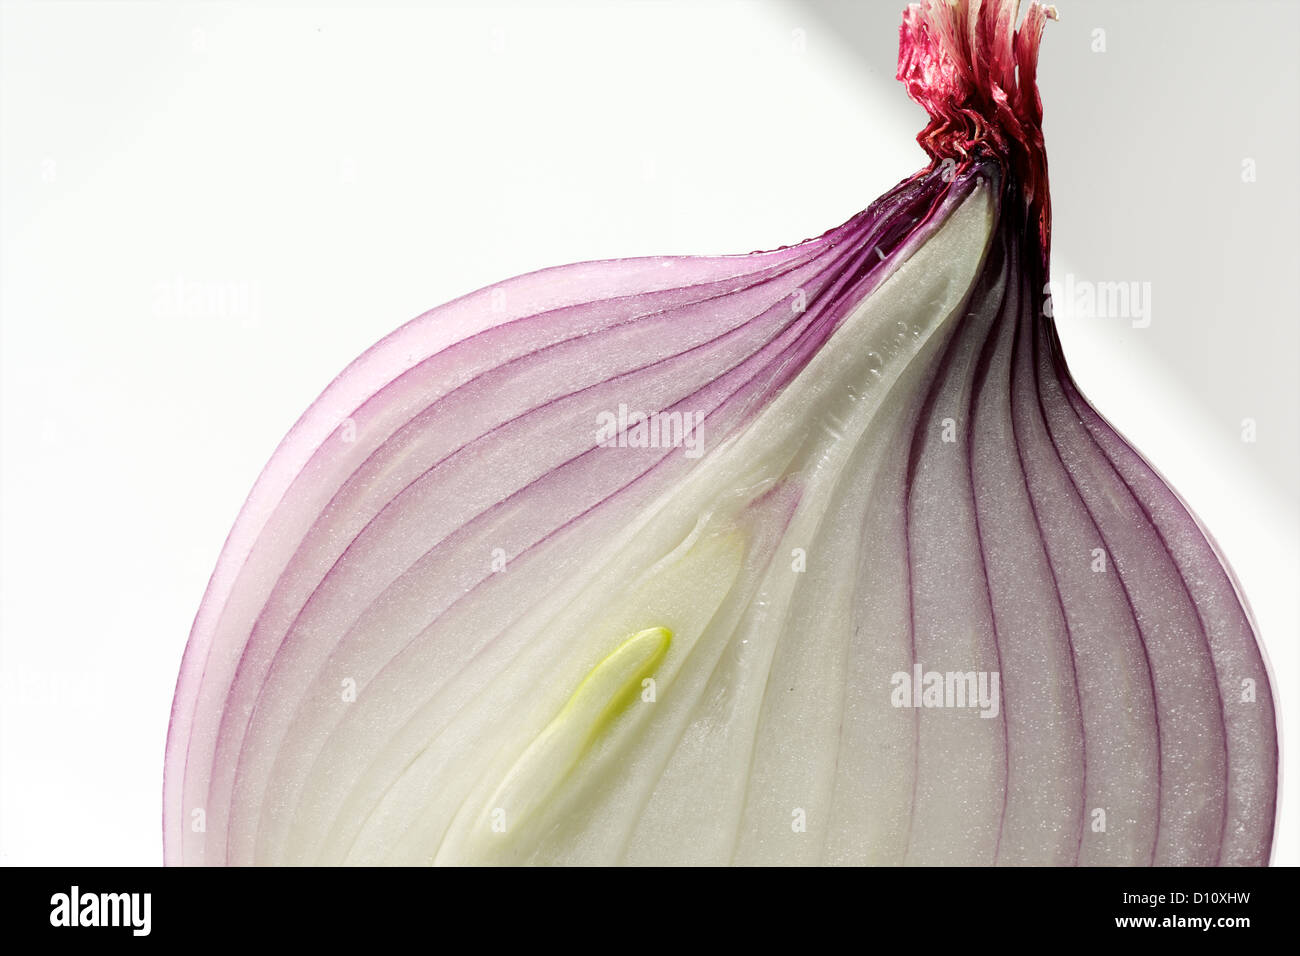 Detail of a onion Stock Photo